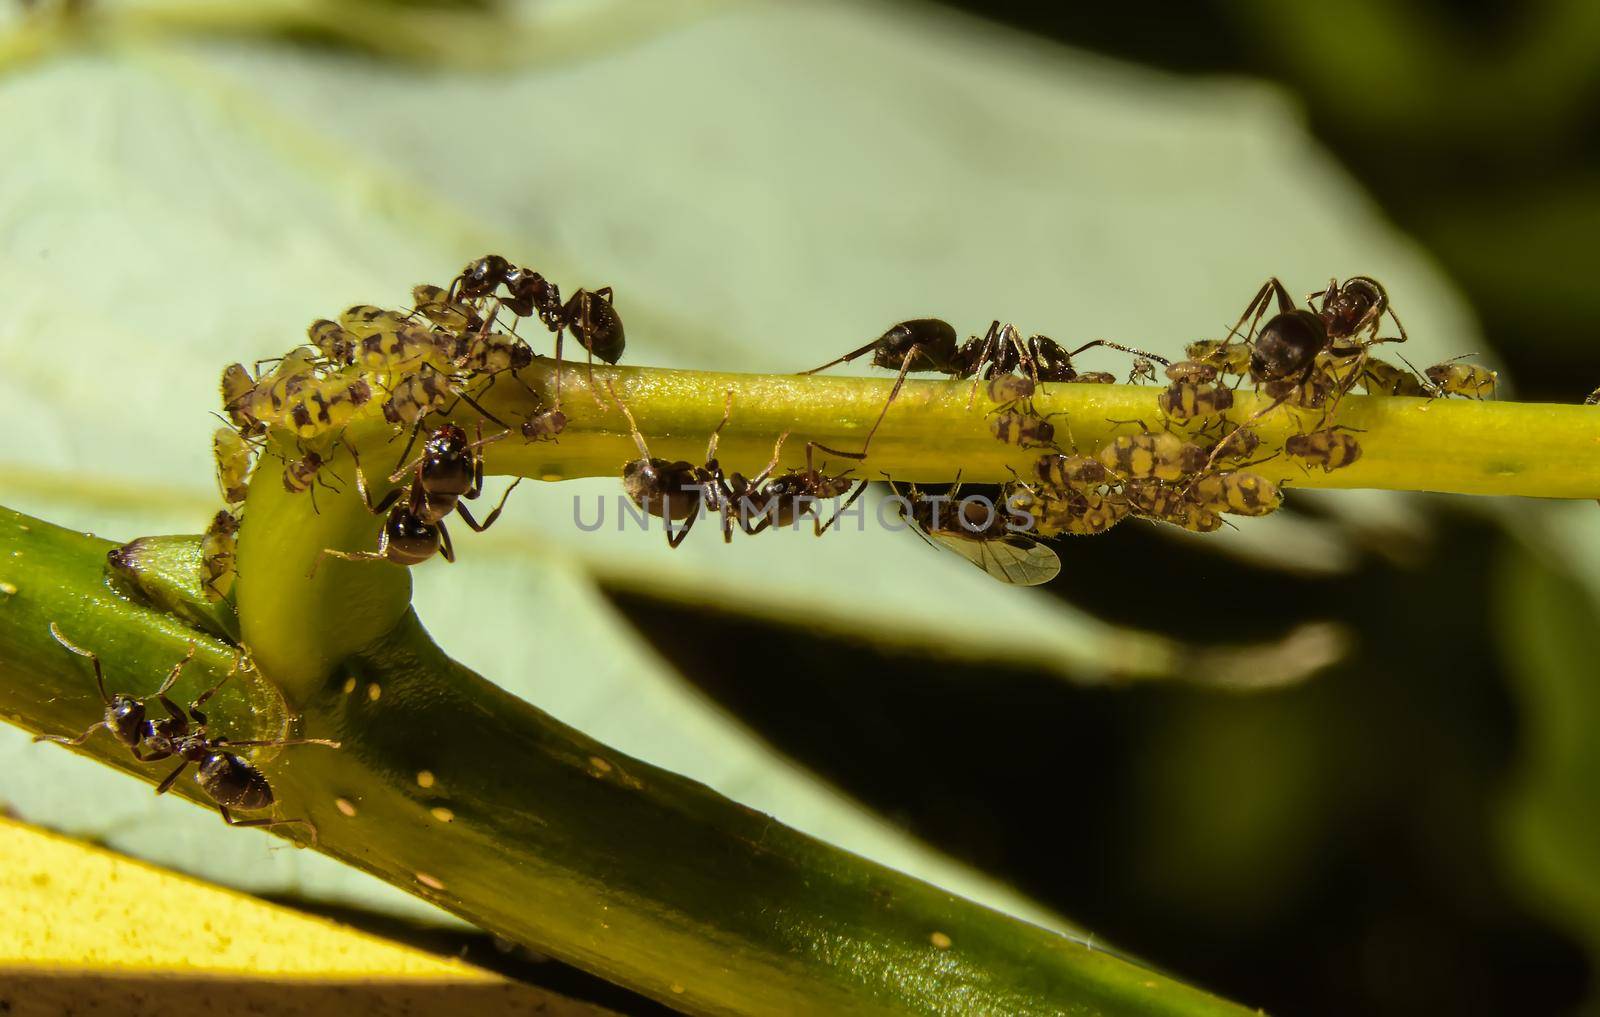 Ants taking care f colonies of aphids on stem. Extreme close up